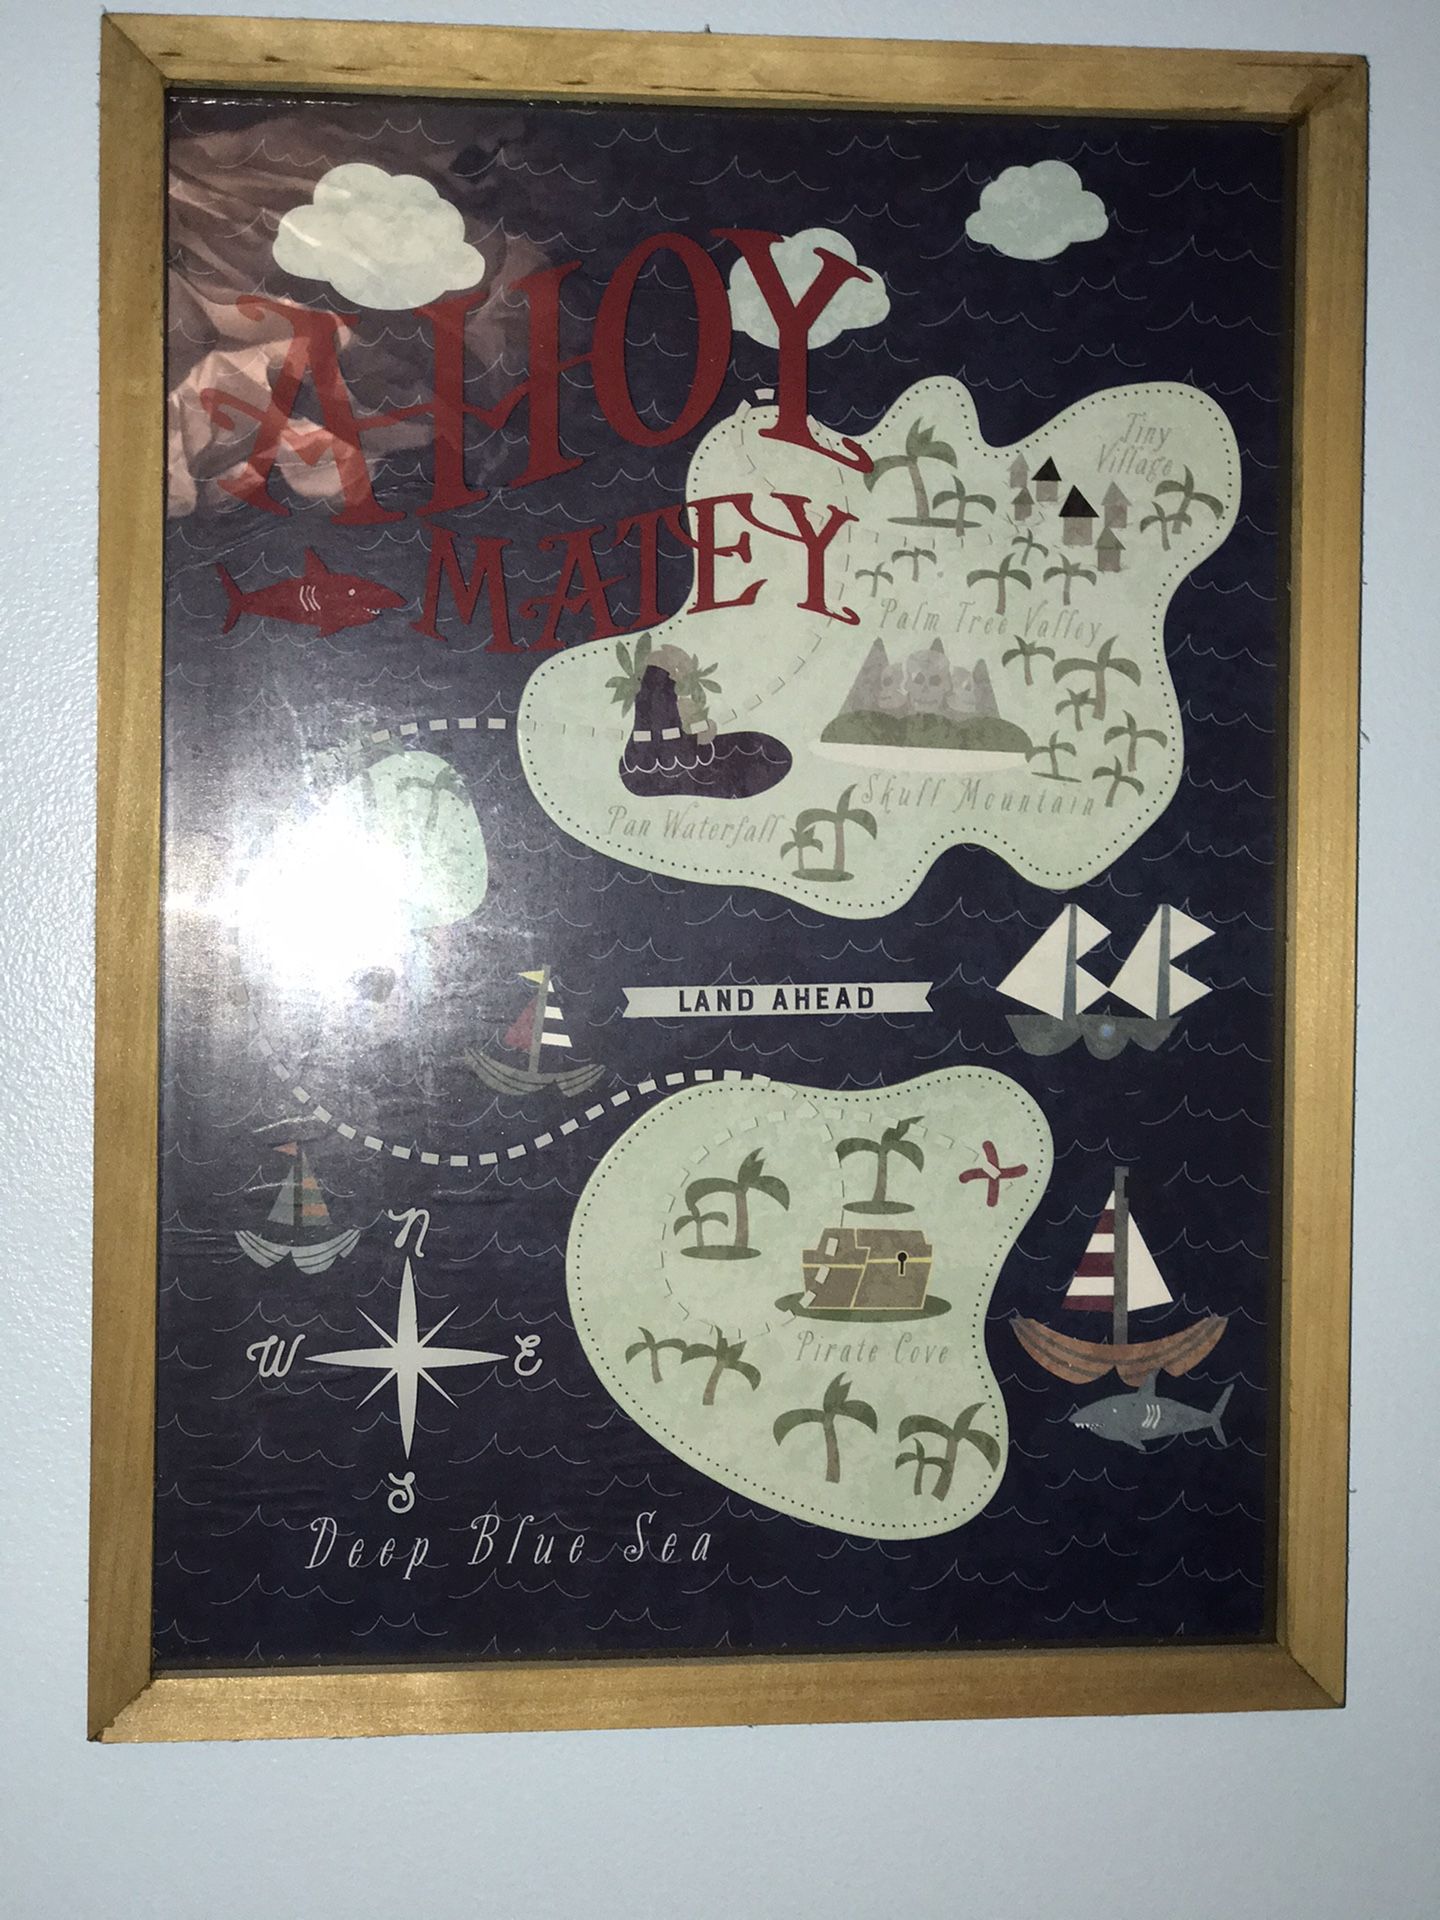 Used ahoy matey and anchor wall decor